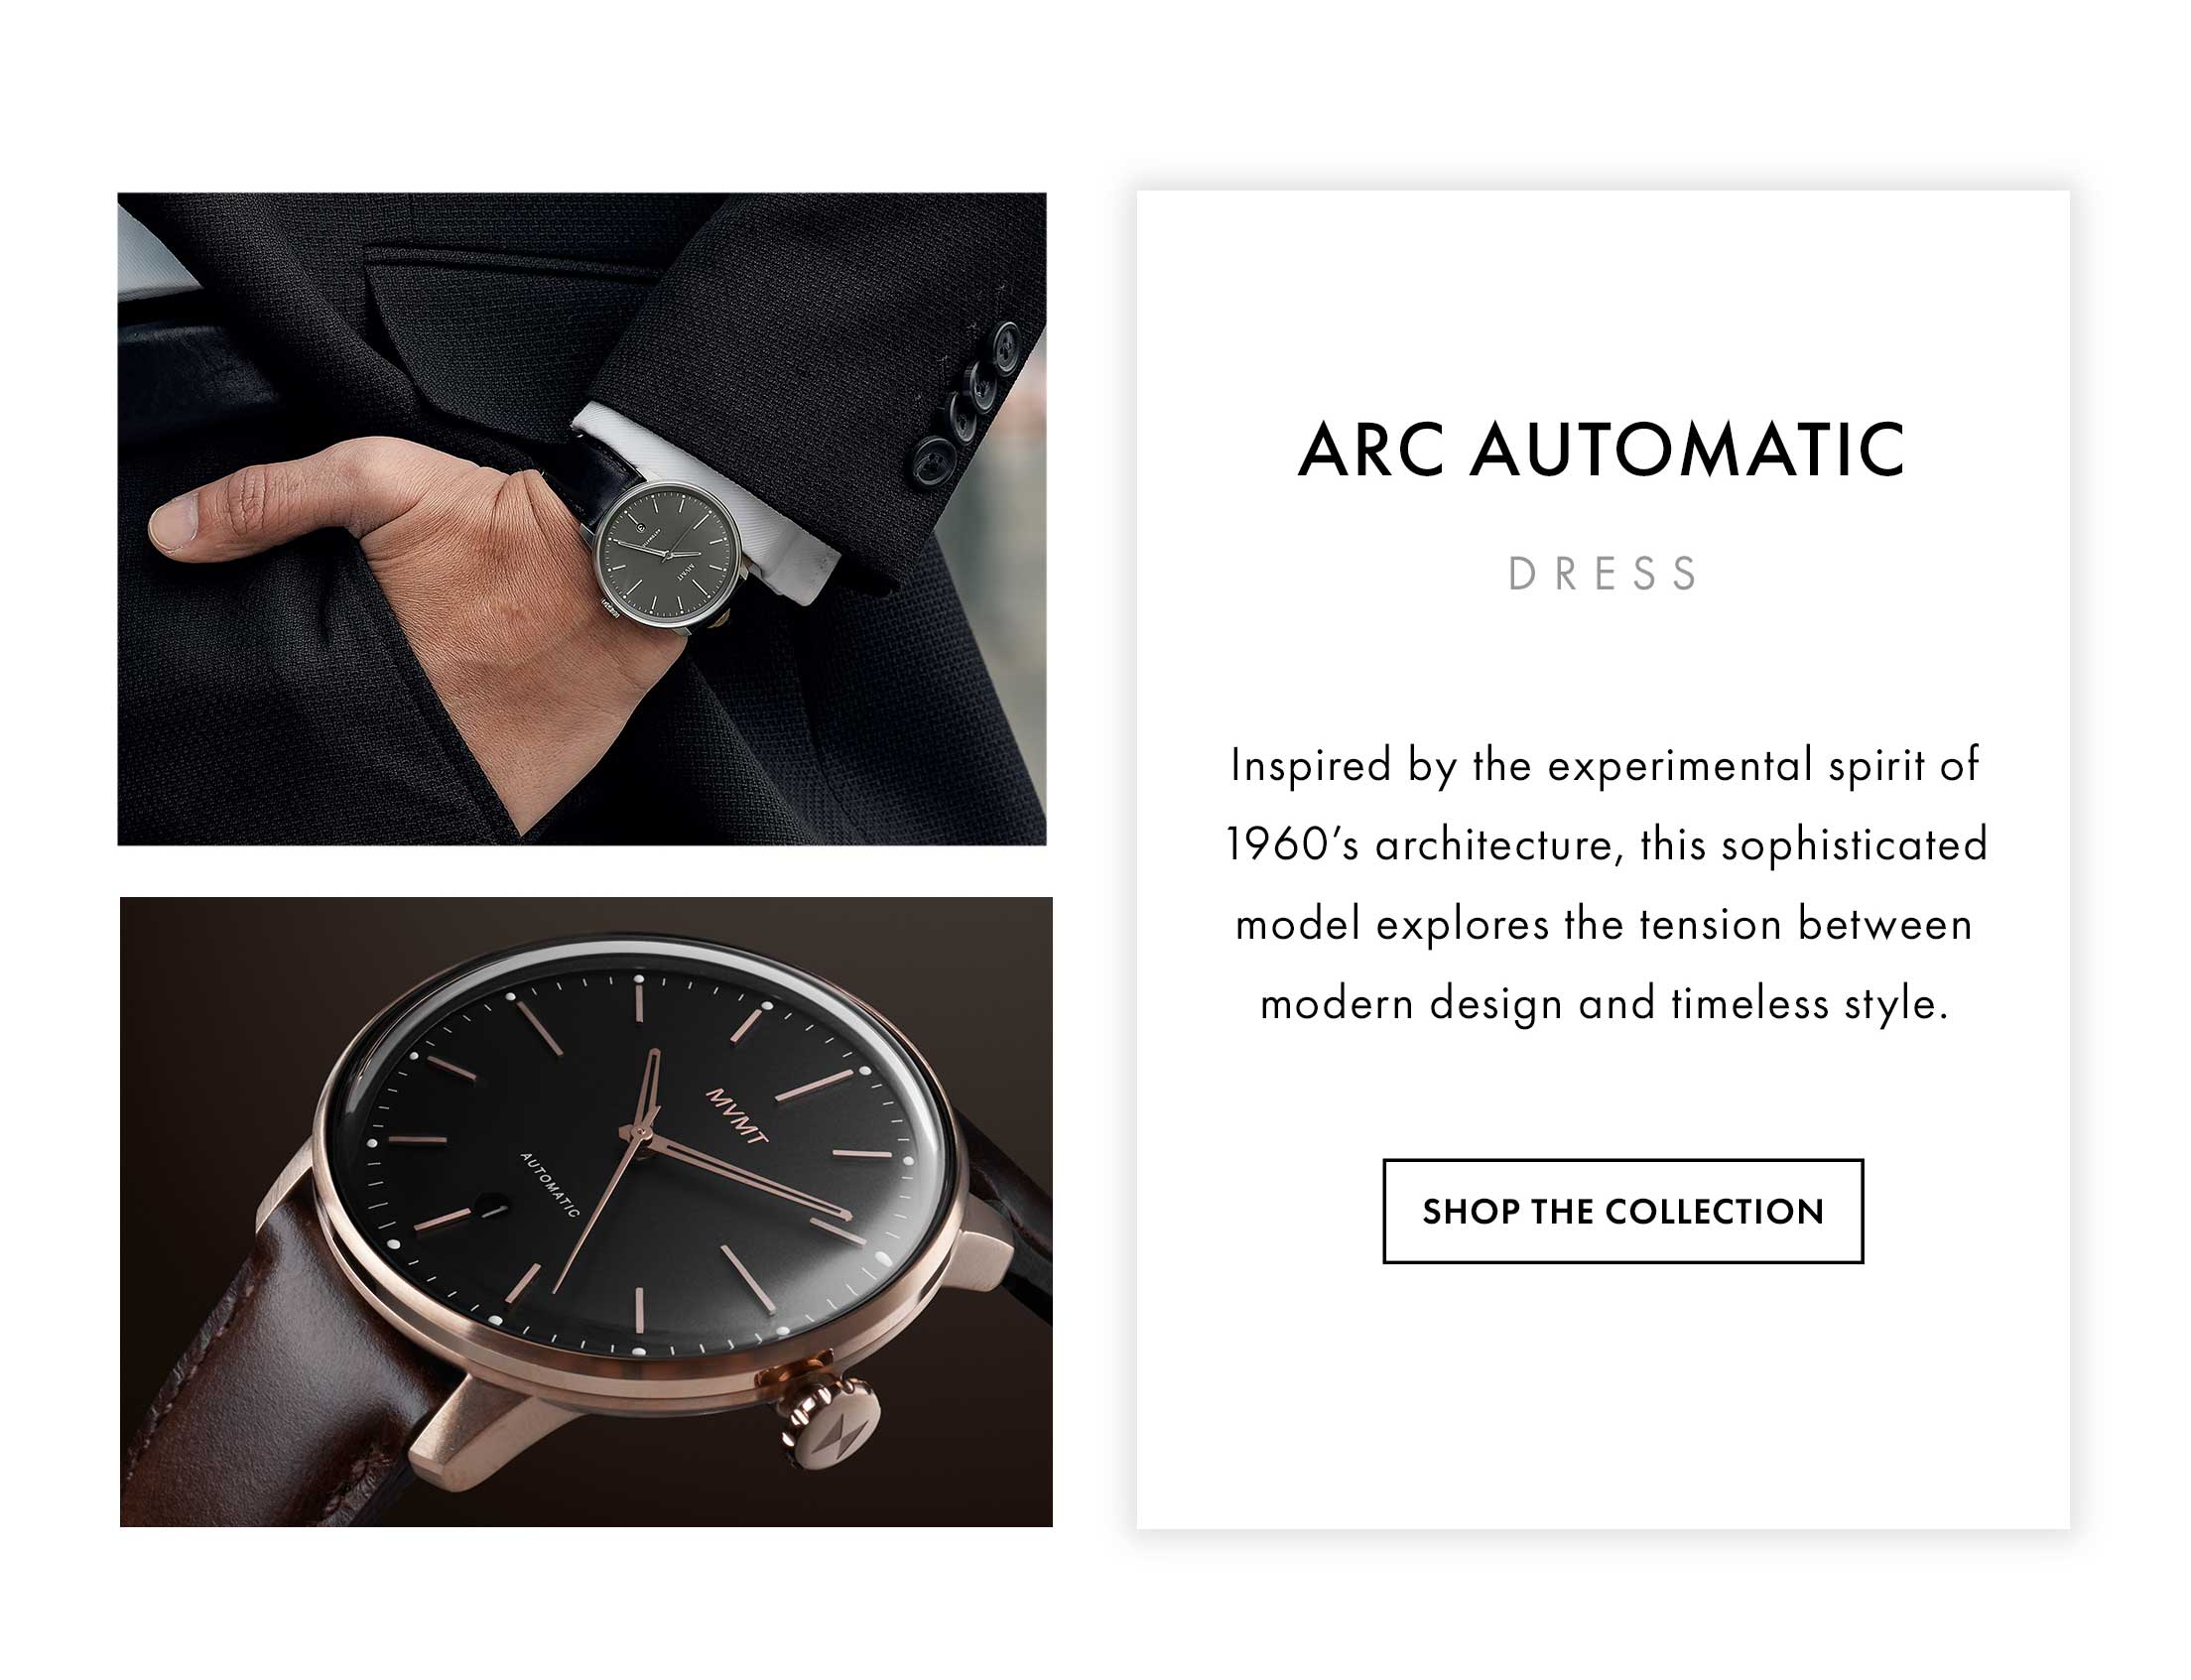 Arc Automatic: Dress Inspired by the experimental spirit of 1960’s architecture, this sophisticated model explores the tension between modern design and timeless style.  Shop the Collection